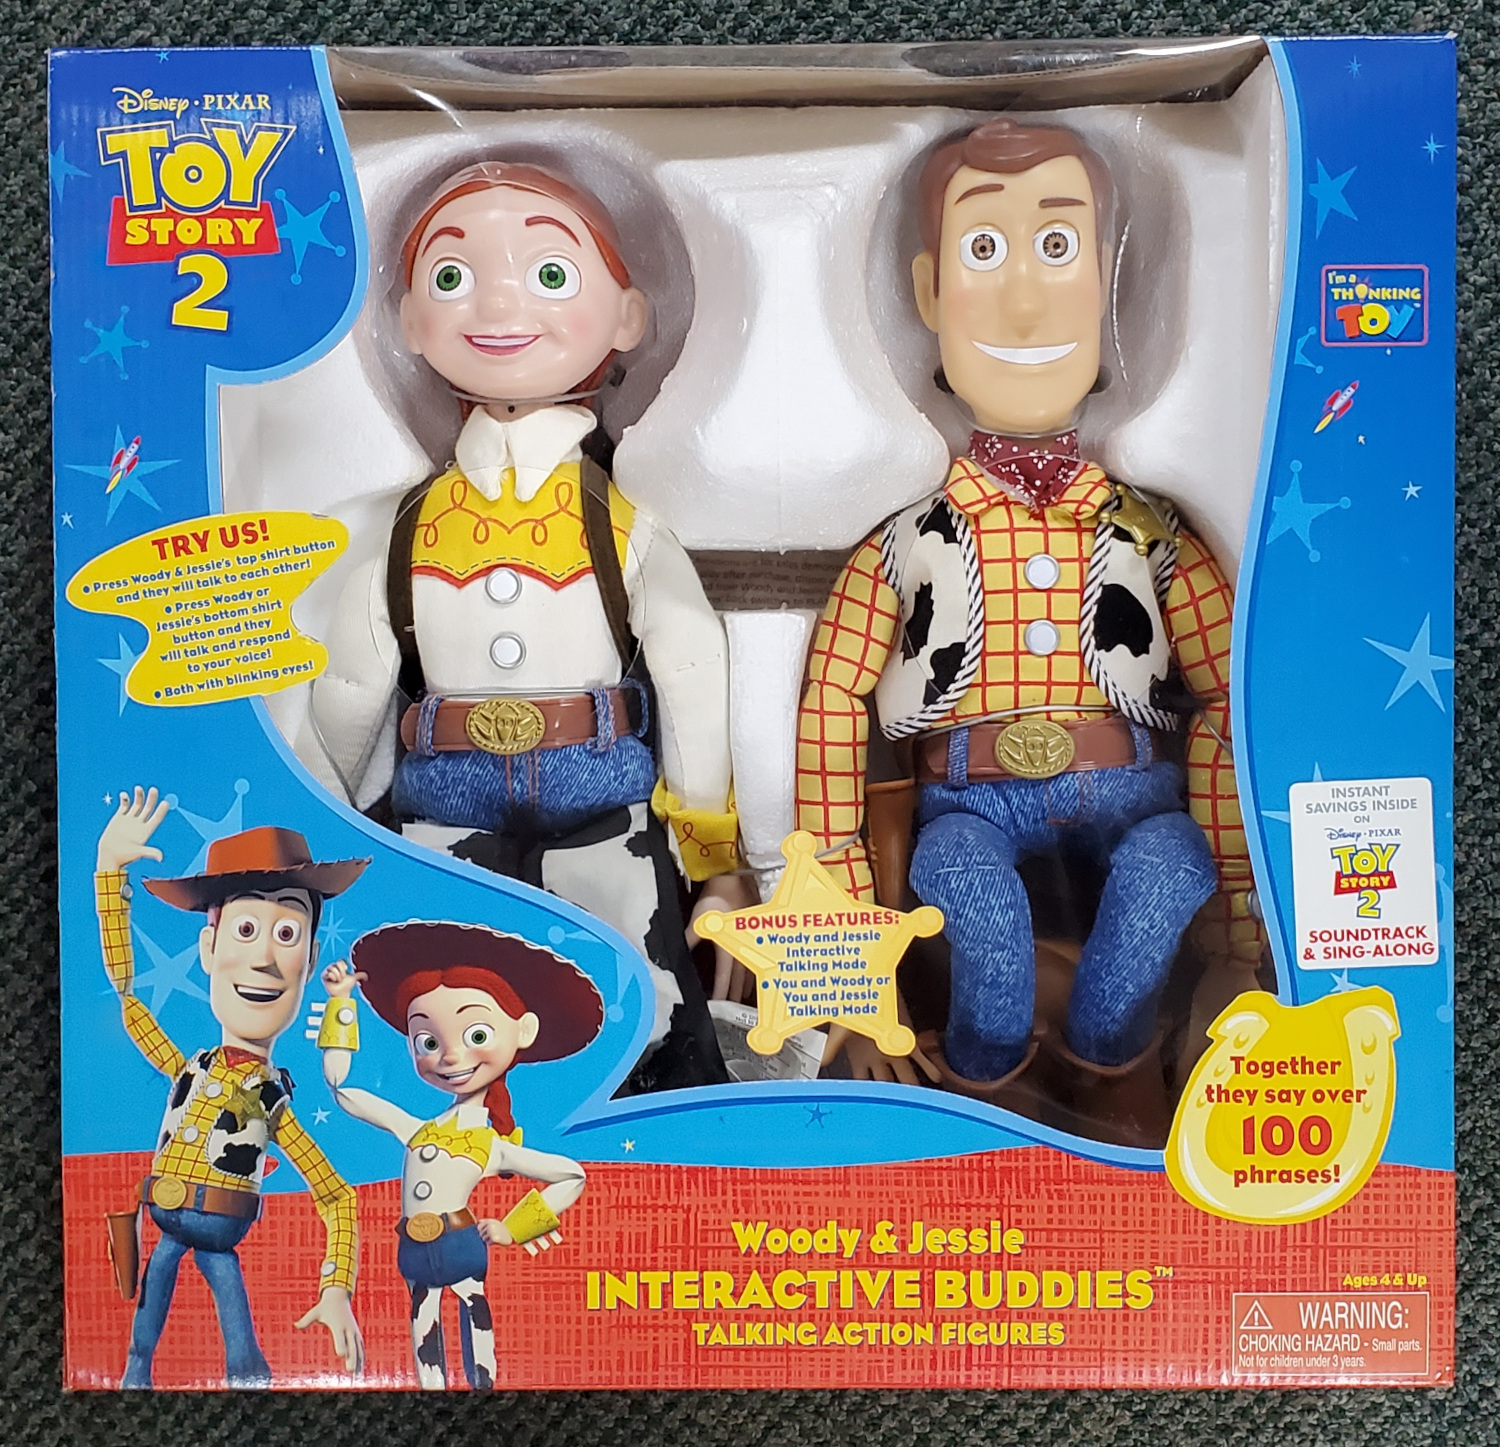 MIB Thinkway Toys Toy Story 2 Woody & Jessie Interactive Buddies Talking Action Figures Mint in Sealed Box 1